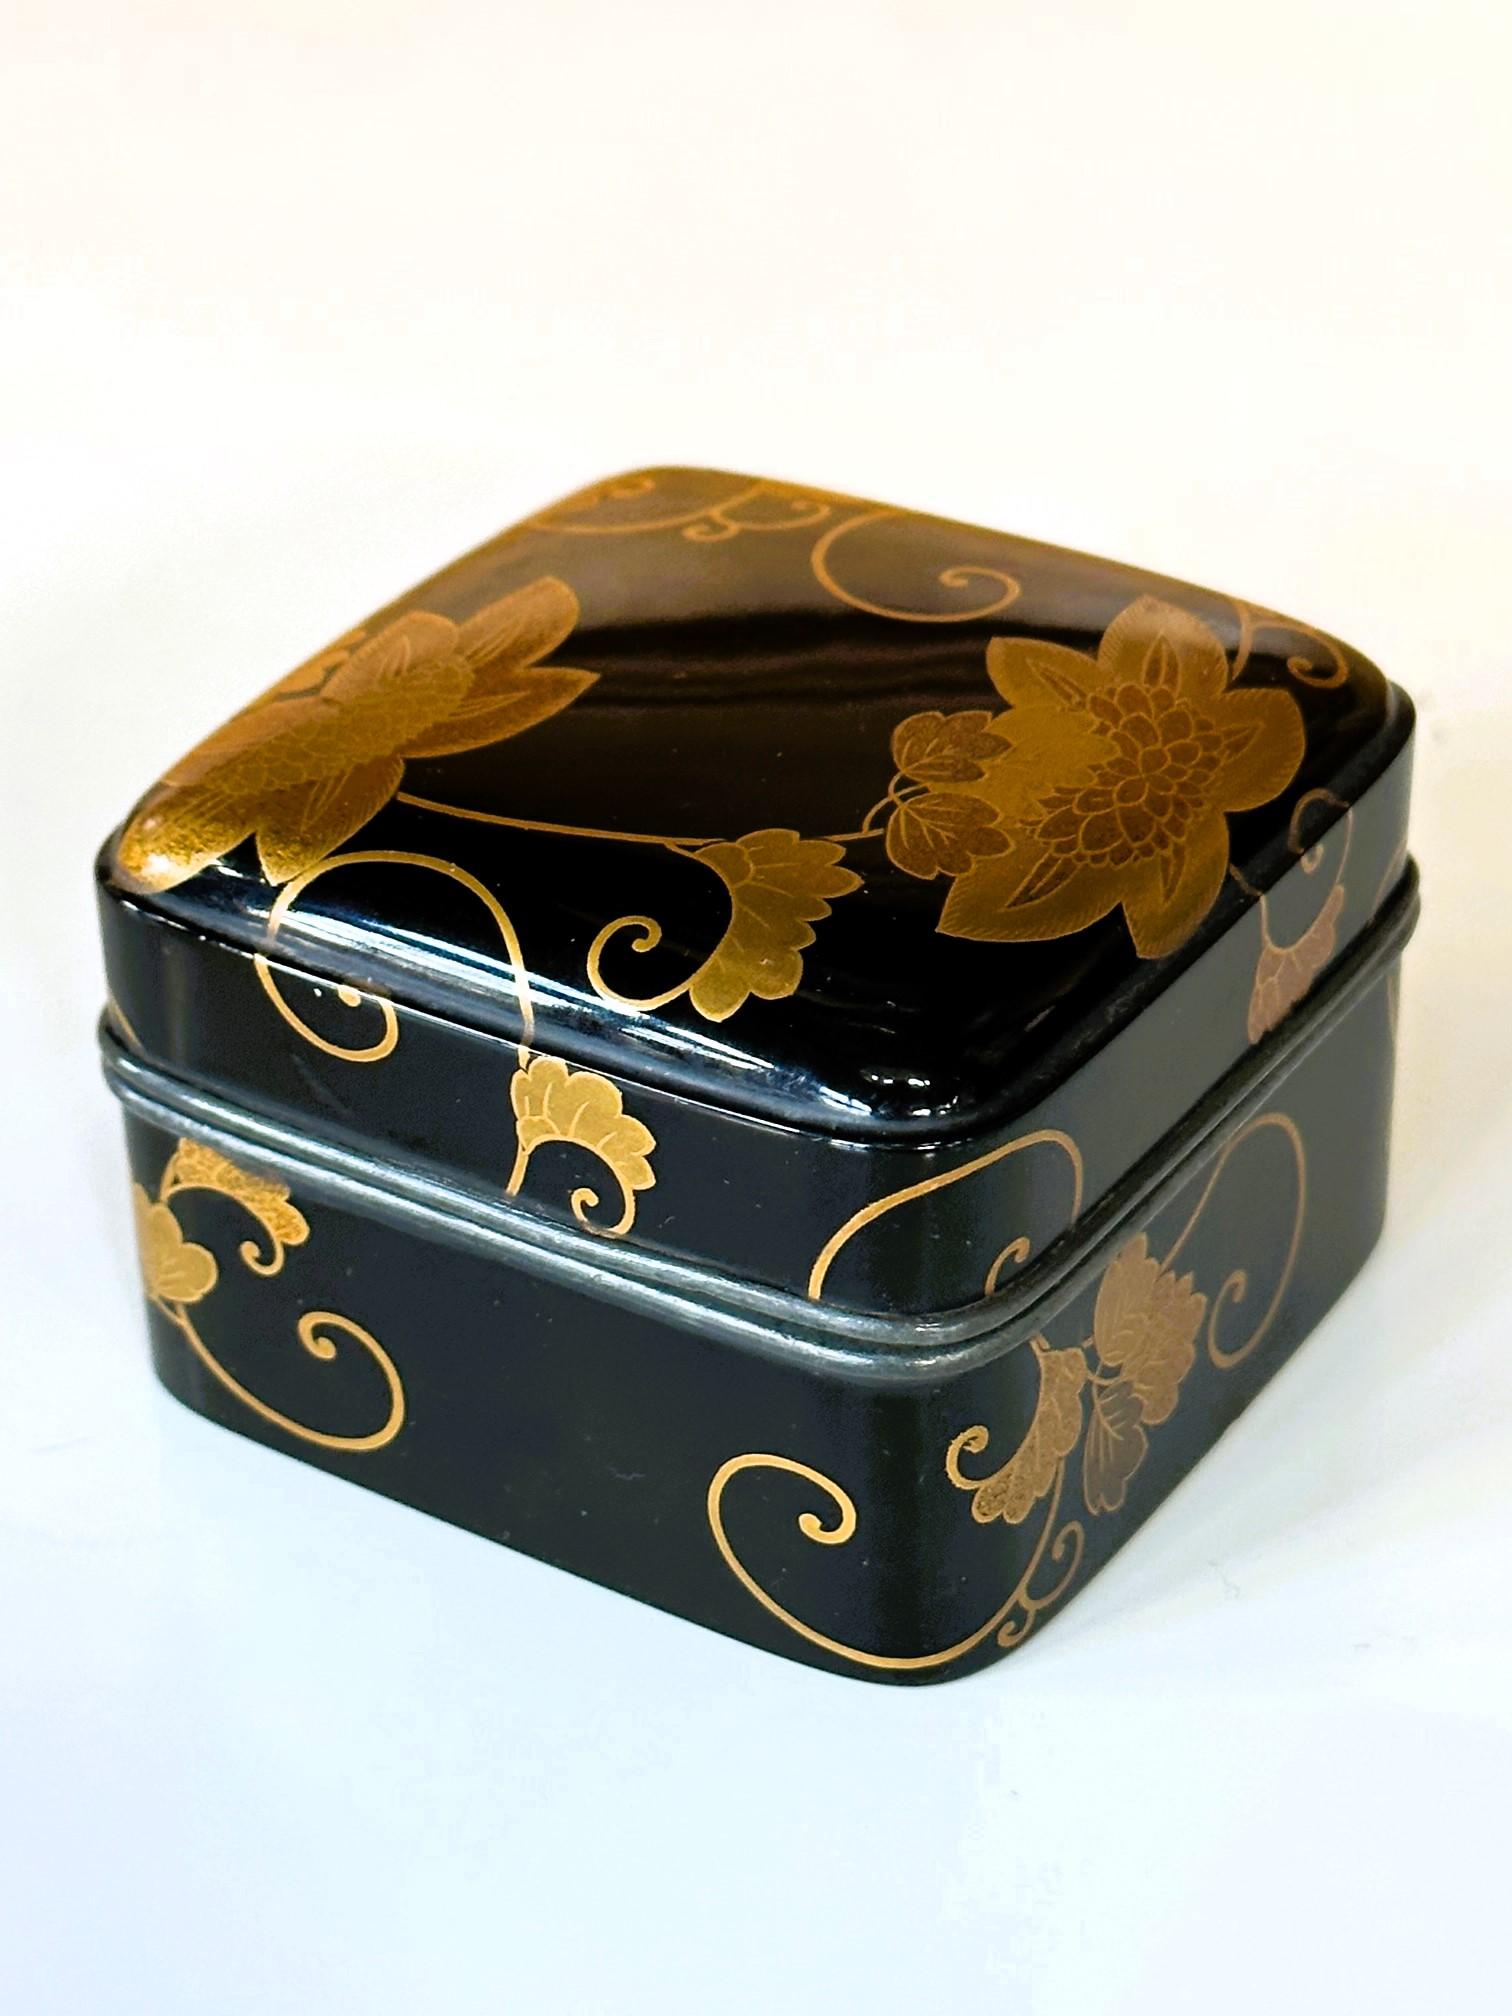 An antique lacquered small box that was likely used to contain incense powder (it is called Kobako in Japanese), circa early to mid-19th century of the Edo period. The square form box with a fitted lid features a slight dome shape with rounded